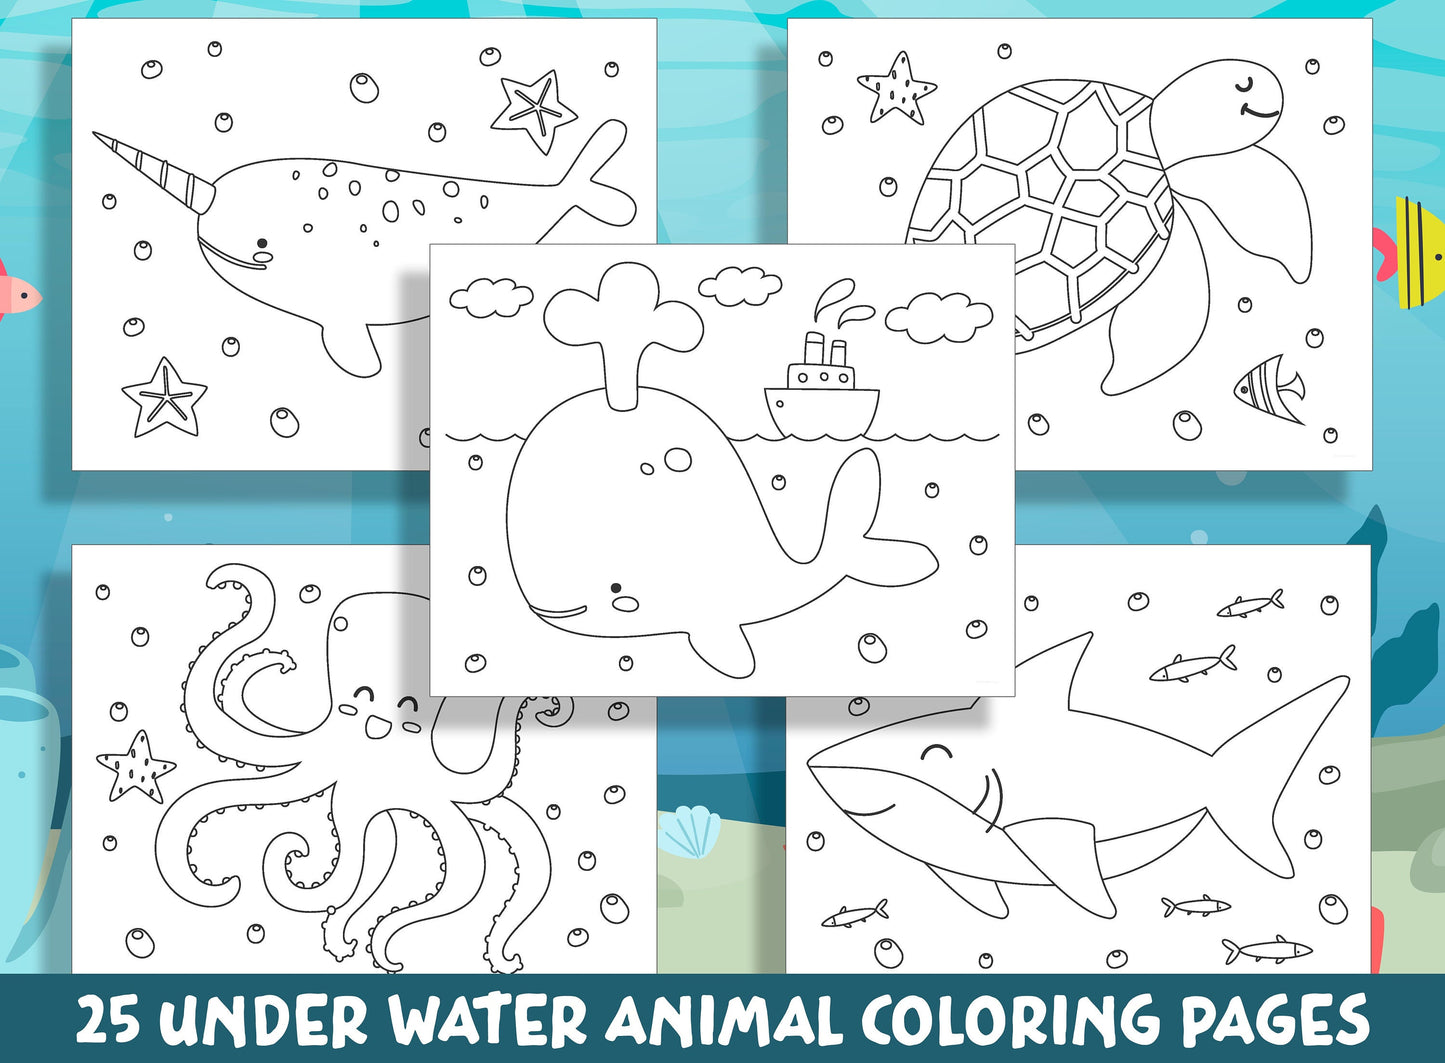 25 Fun and Engaging Underwater Animal Coloring Pages for Preschool and Kindergarten, PDF File, Instant Download